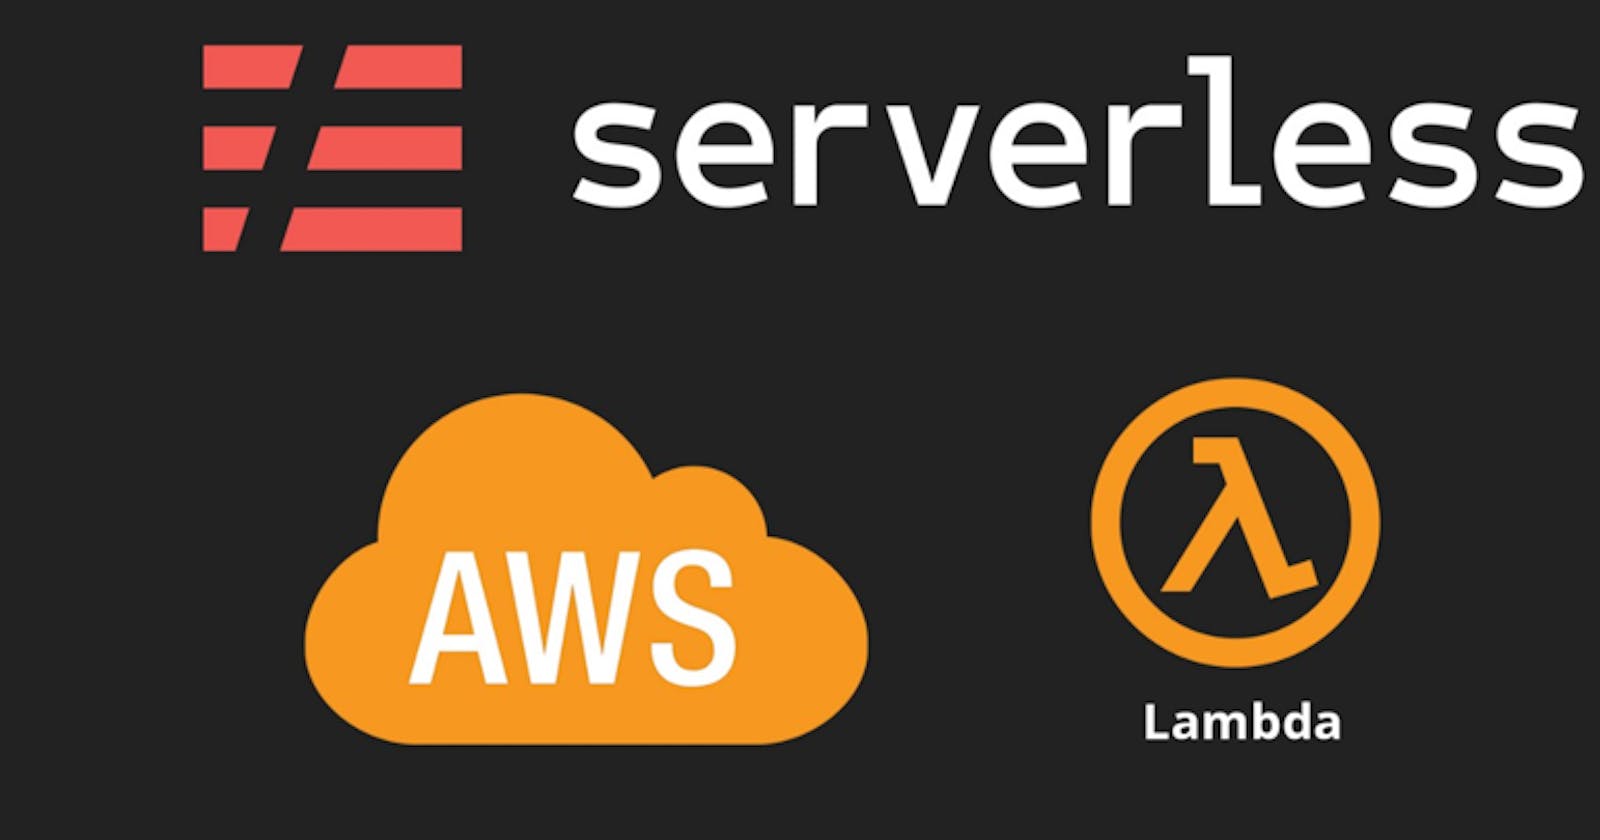 ServerlessArchitecture#06 Caching for Serverless Applications